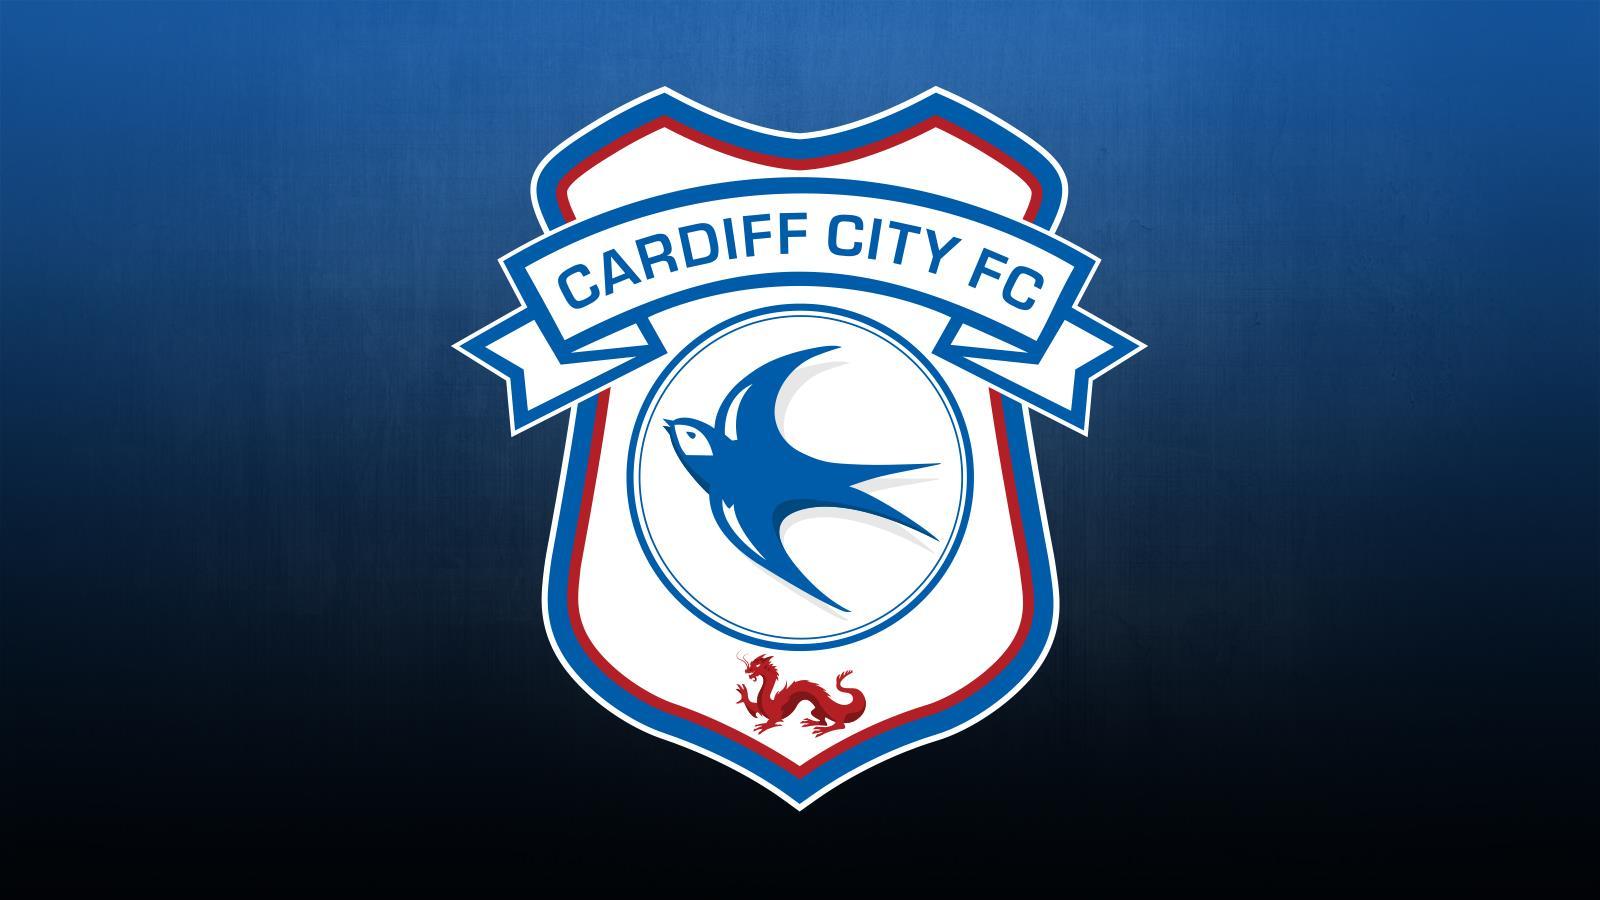 Cardiff City HD Wallpaper and Photo